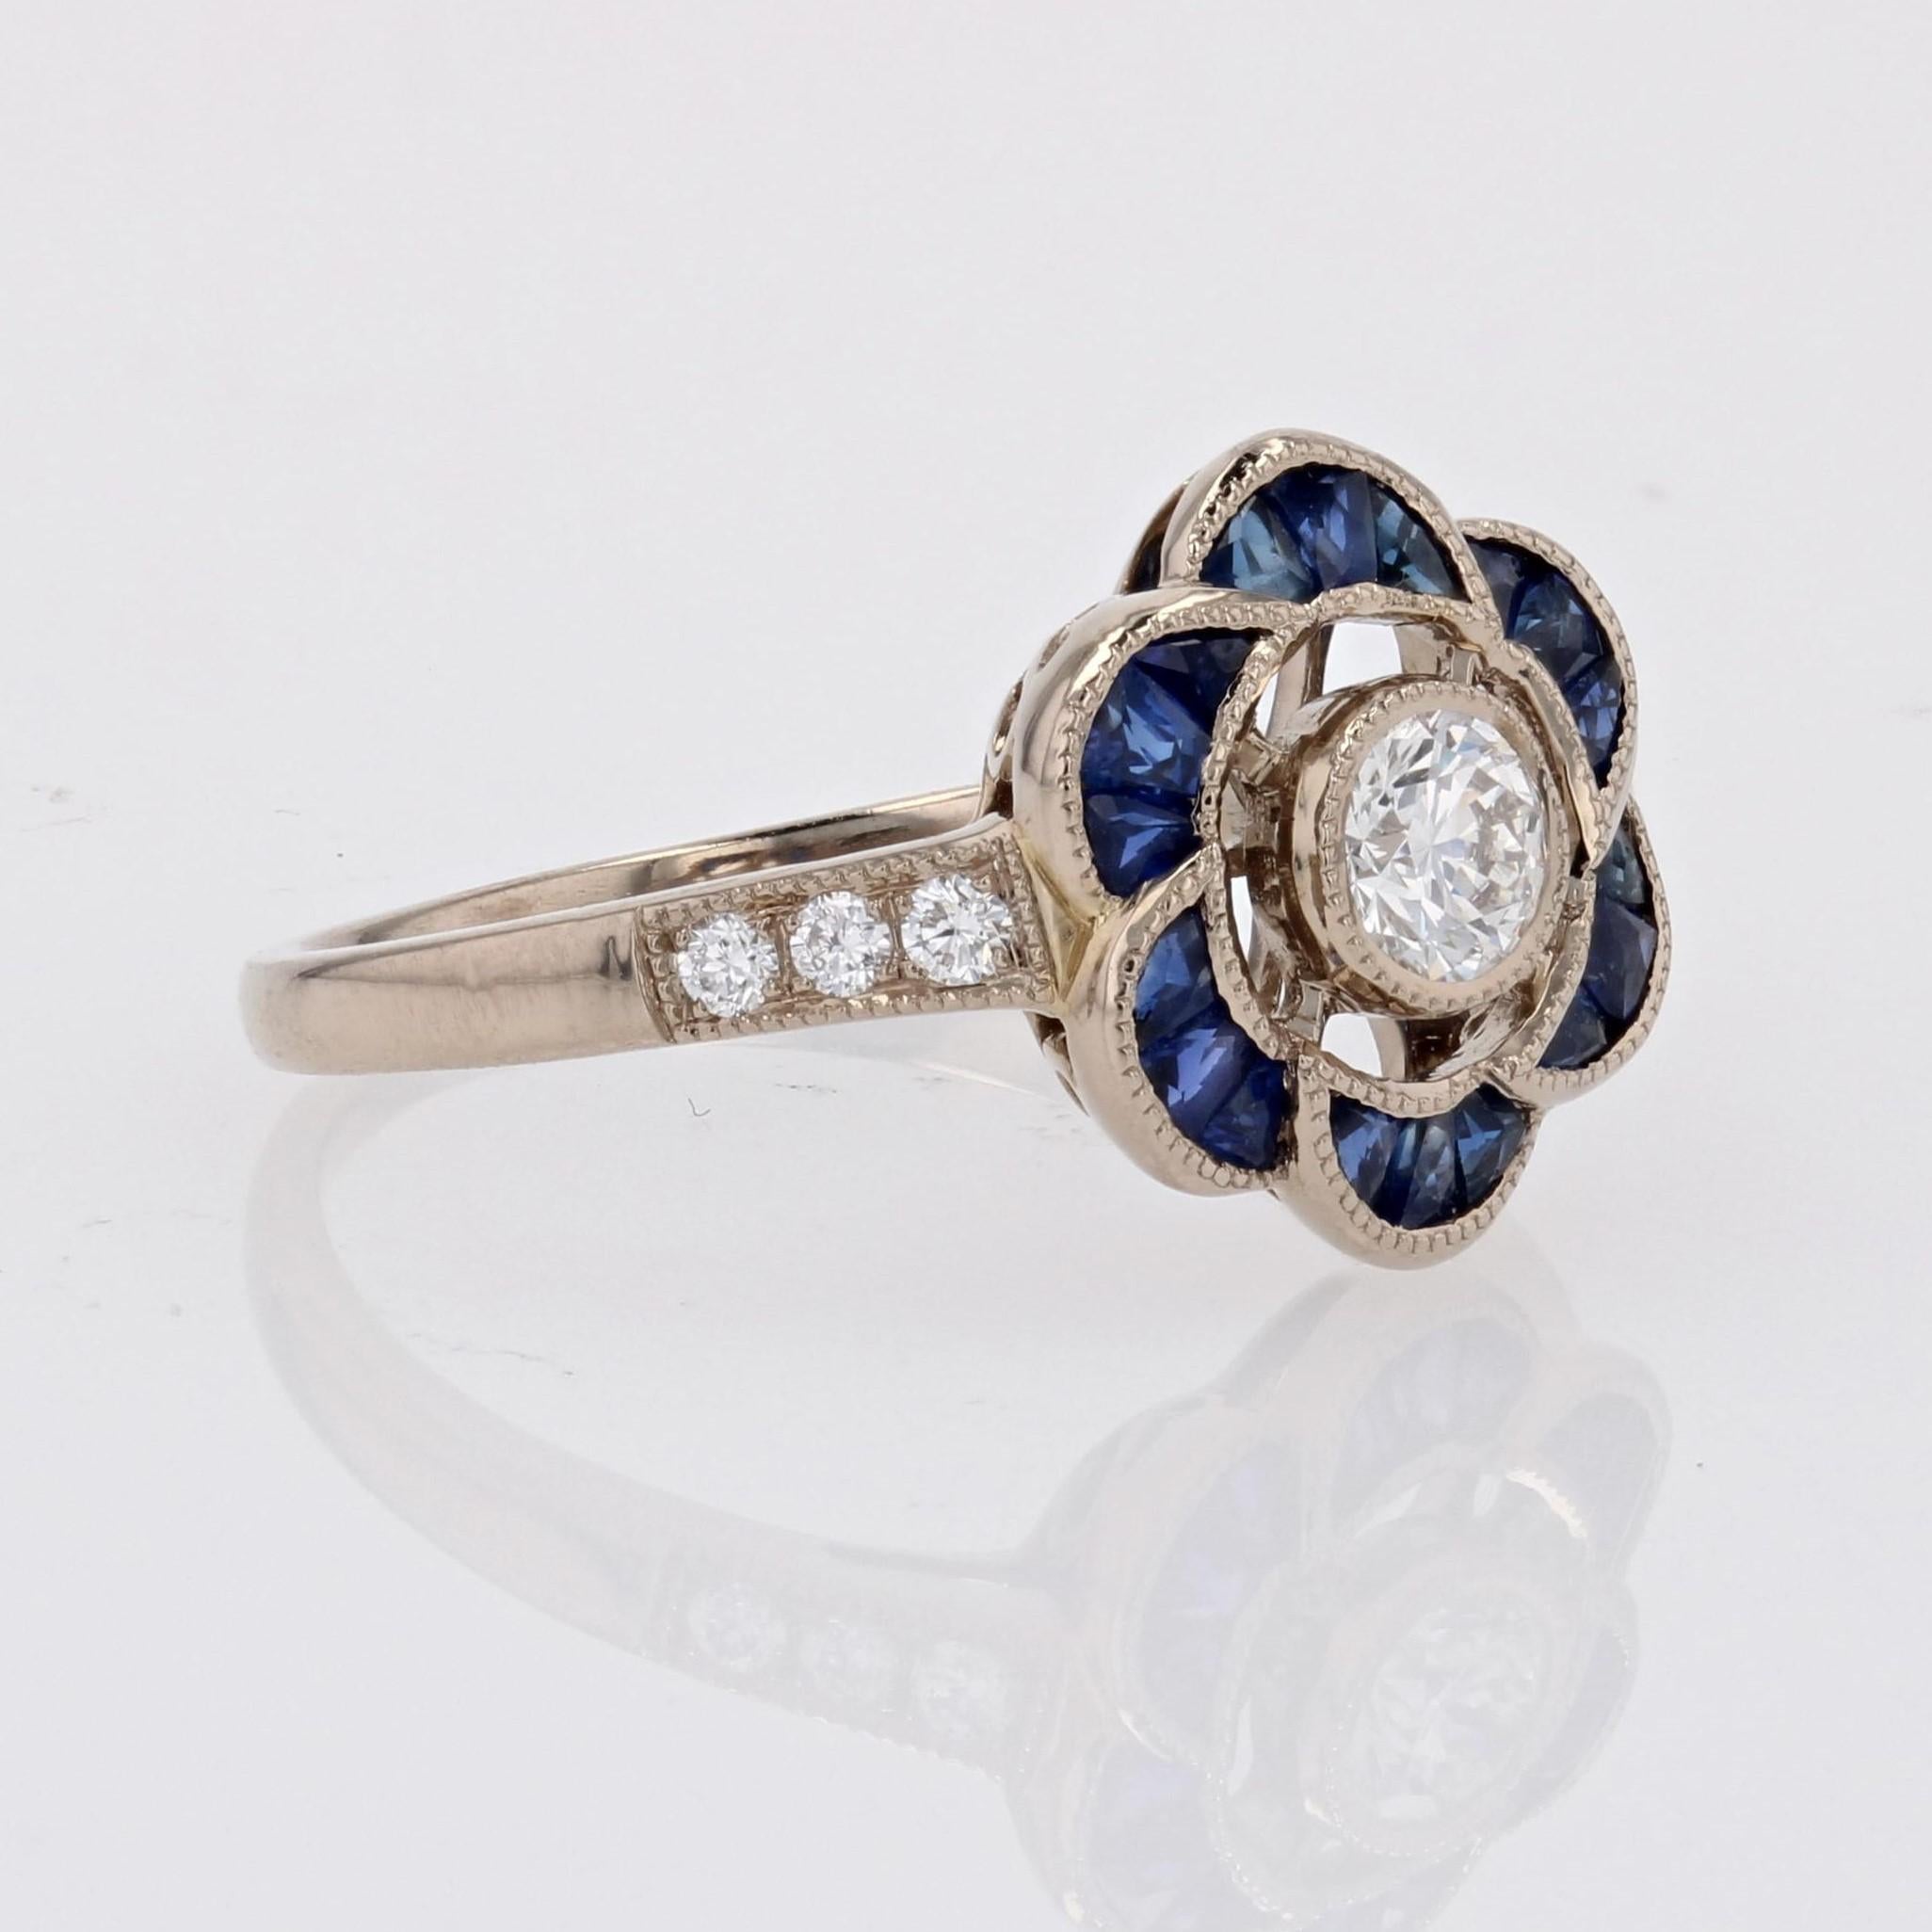 New Art Deco Style Calibrated Sapphires Diamonds 18 K White Gold Flower Ring For Sale 6